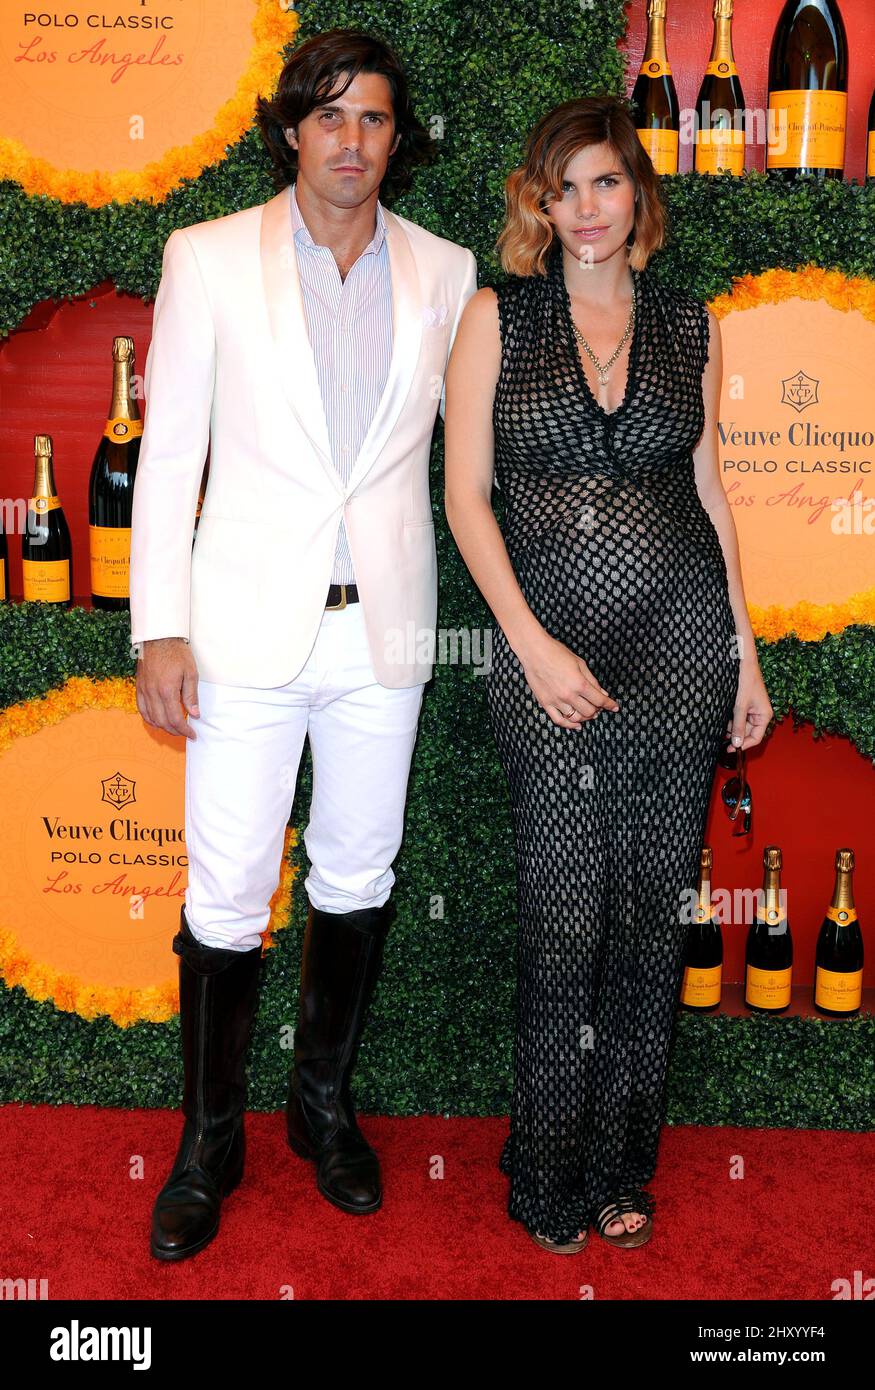 Nacho Figueras and his wife attending the 2012 Veuve Clicquot Polo Classic in California. Stock Photo